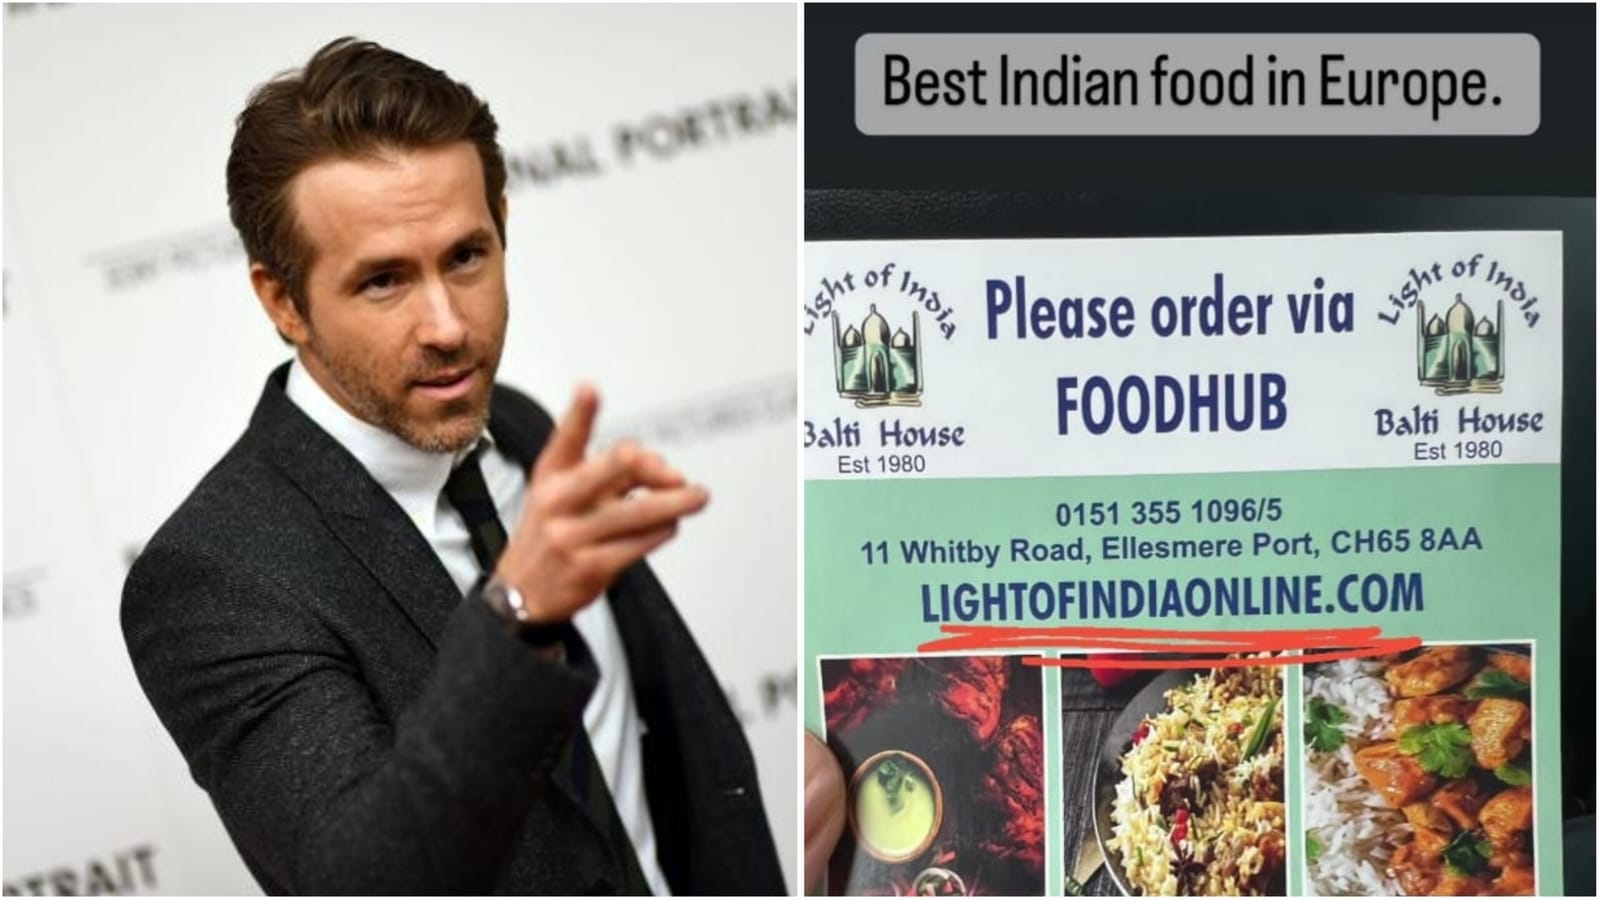 Ryan Reynolds’ endorsement of ‘best Indian food in Europe’ makes small restaurant famous; bookings ‘off the scale’